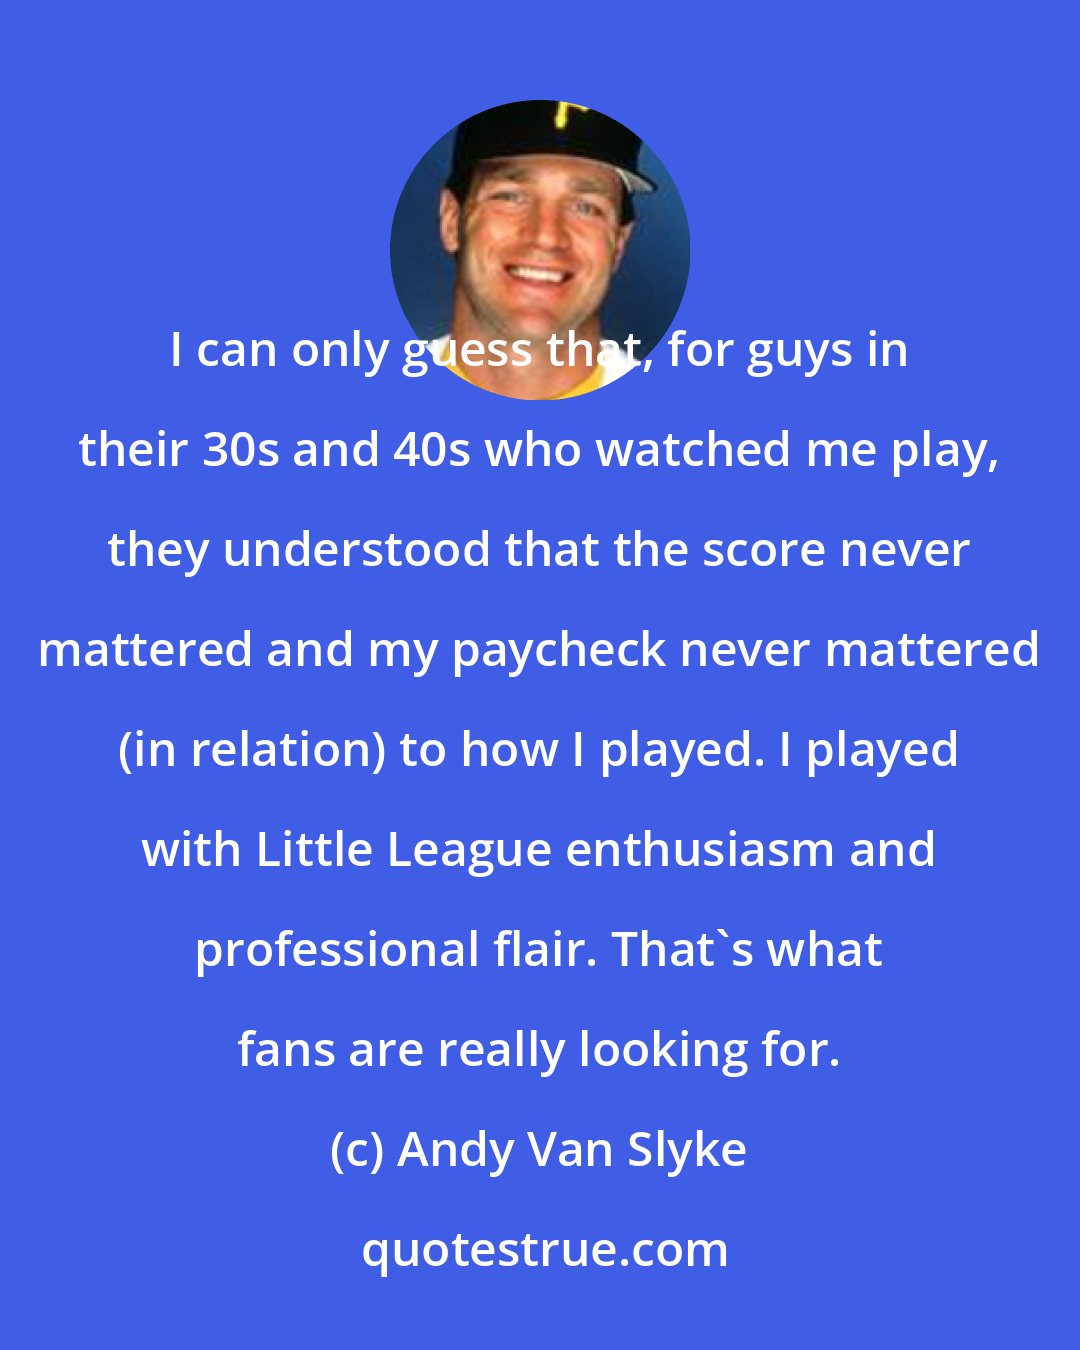 Andy Van Slyke: I can only guess that, for guys in their 30s and 40s who watched me play, they understood that the score never mattered and my paycheck never mattered (in relation) to how I played. I played with Little League enthusiasm and professional flair. That's what fans are really looking for.